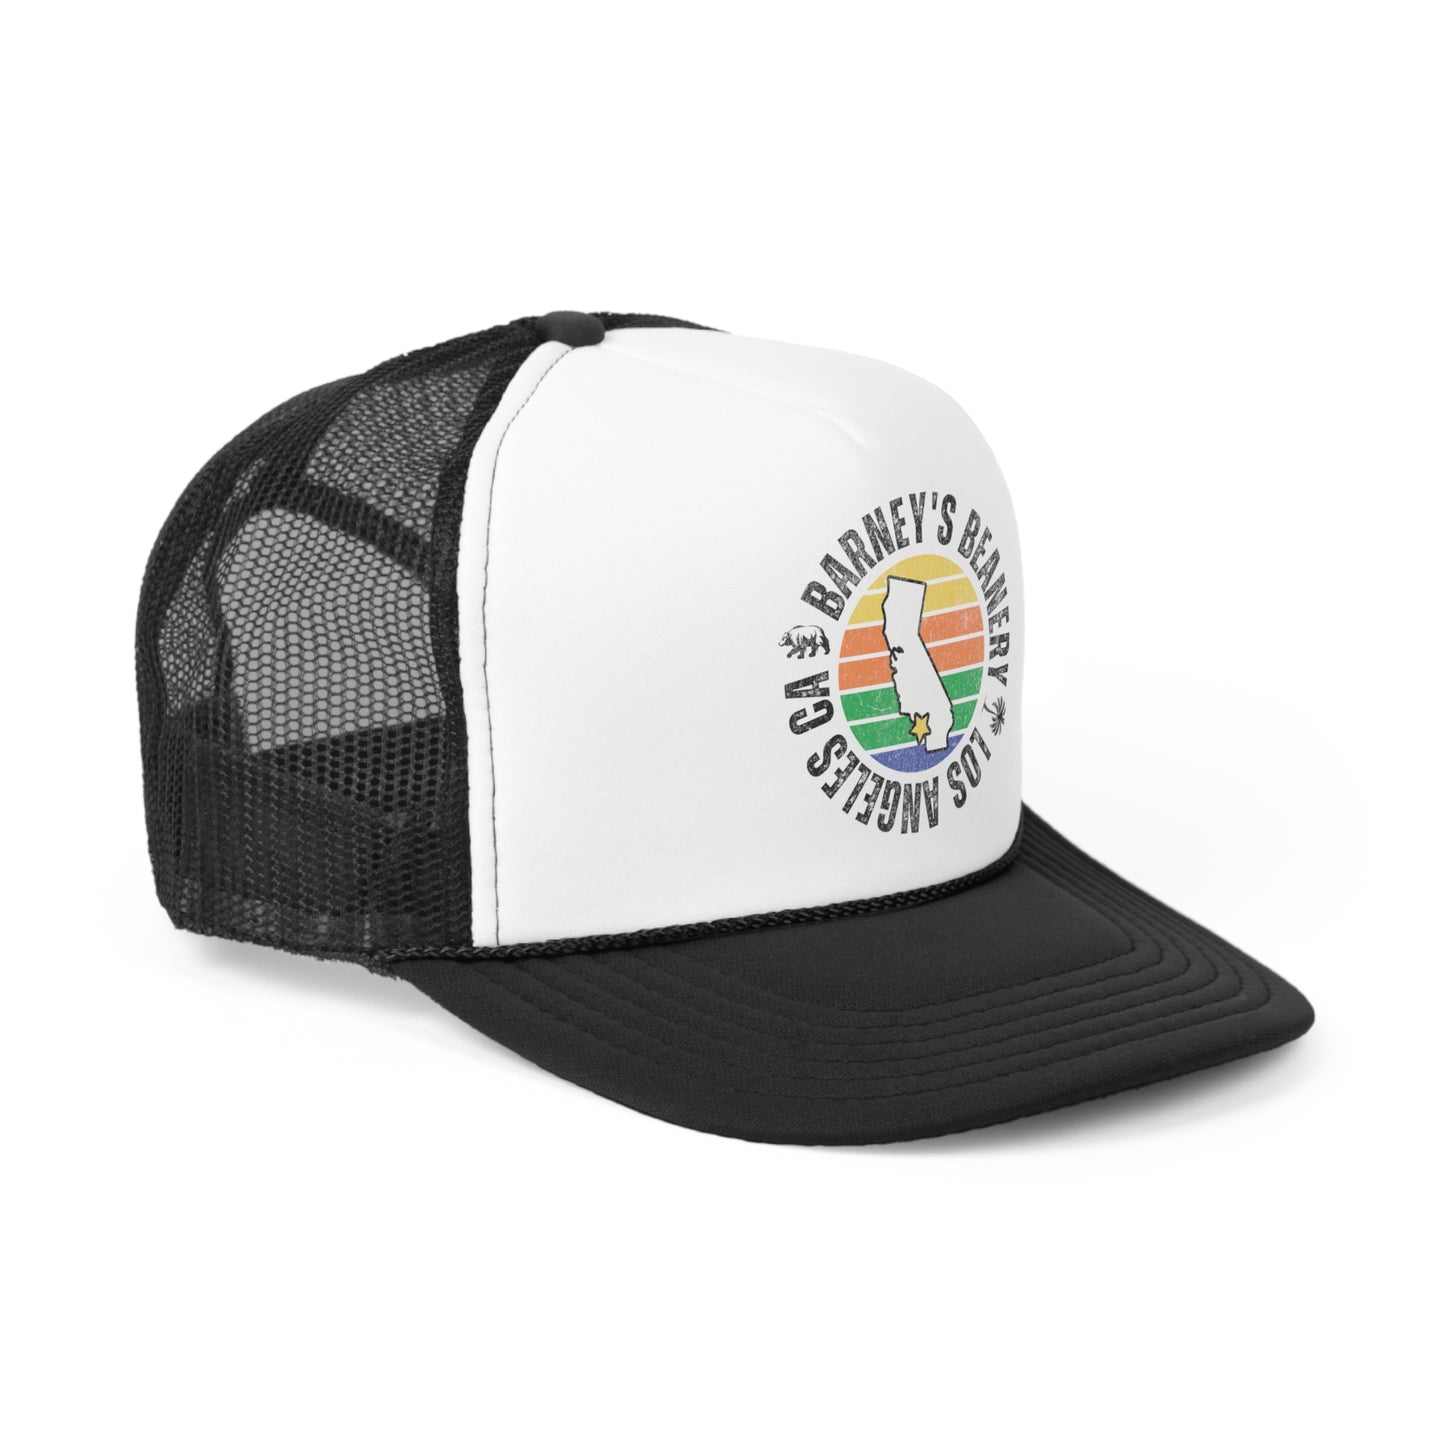 Retro Sunset | BARNEY'S BEANERY - Trucker Hat | Retro Sunset Graphic On Black And White Trucker Hat, Front Right View